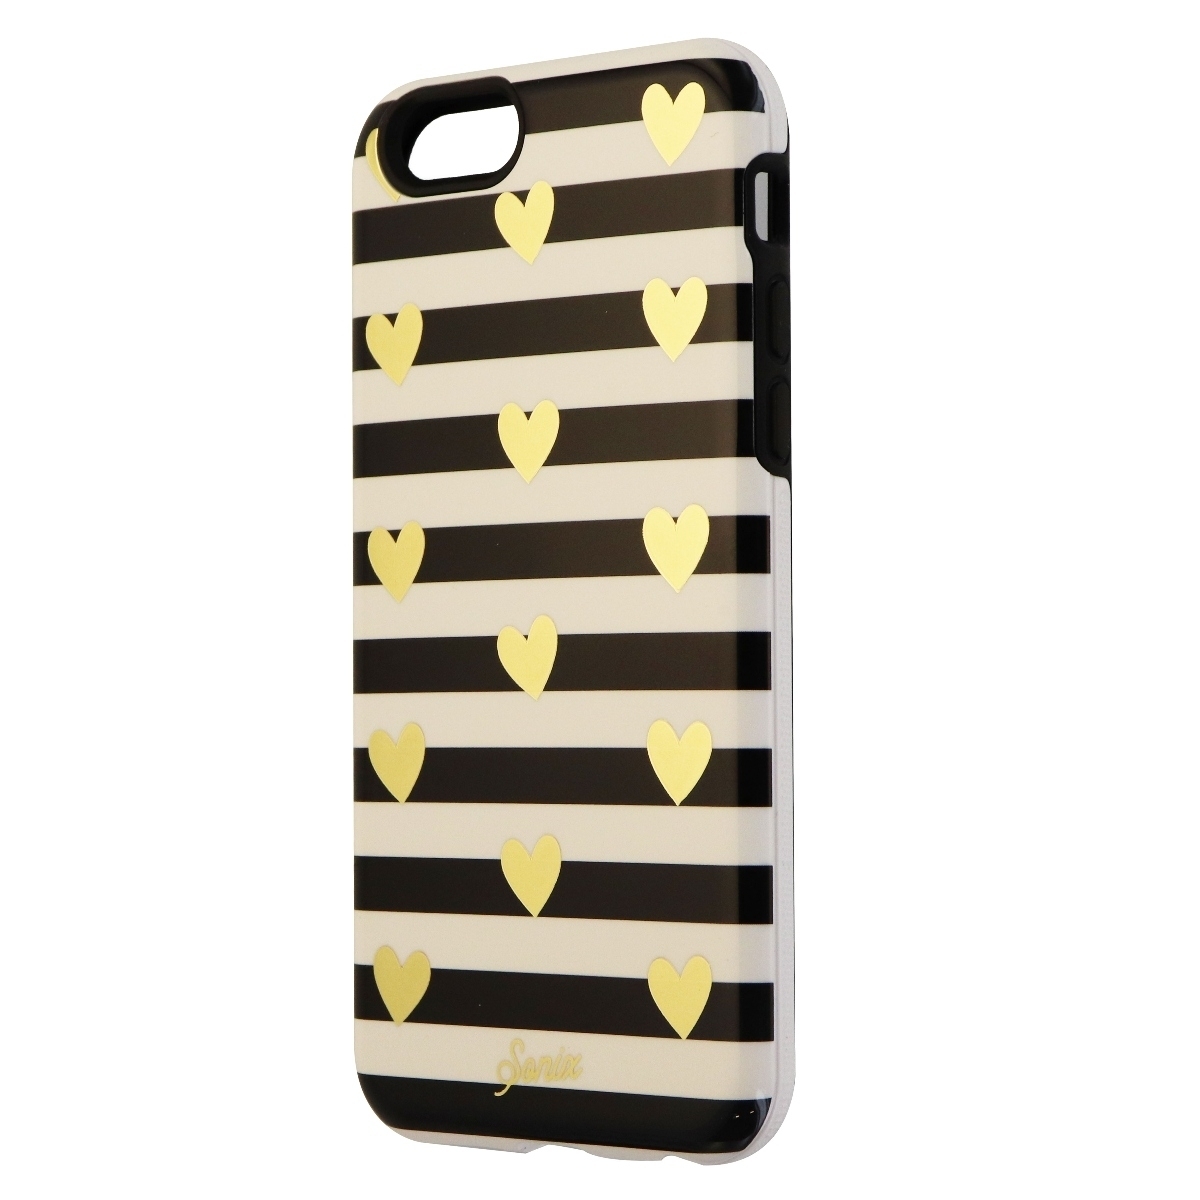 Sonix Inlay Series Dual Layer Case For IPhone 6s/6 - Black/White/Gold Hearts